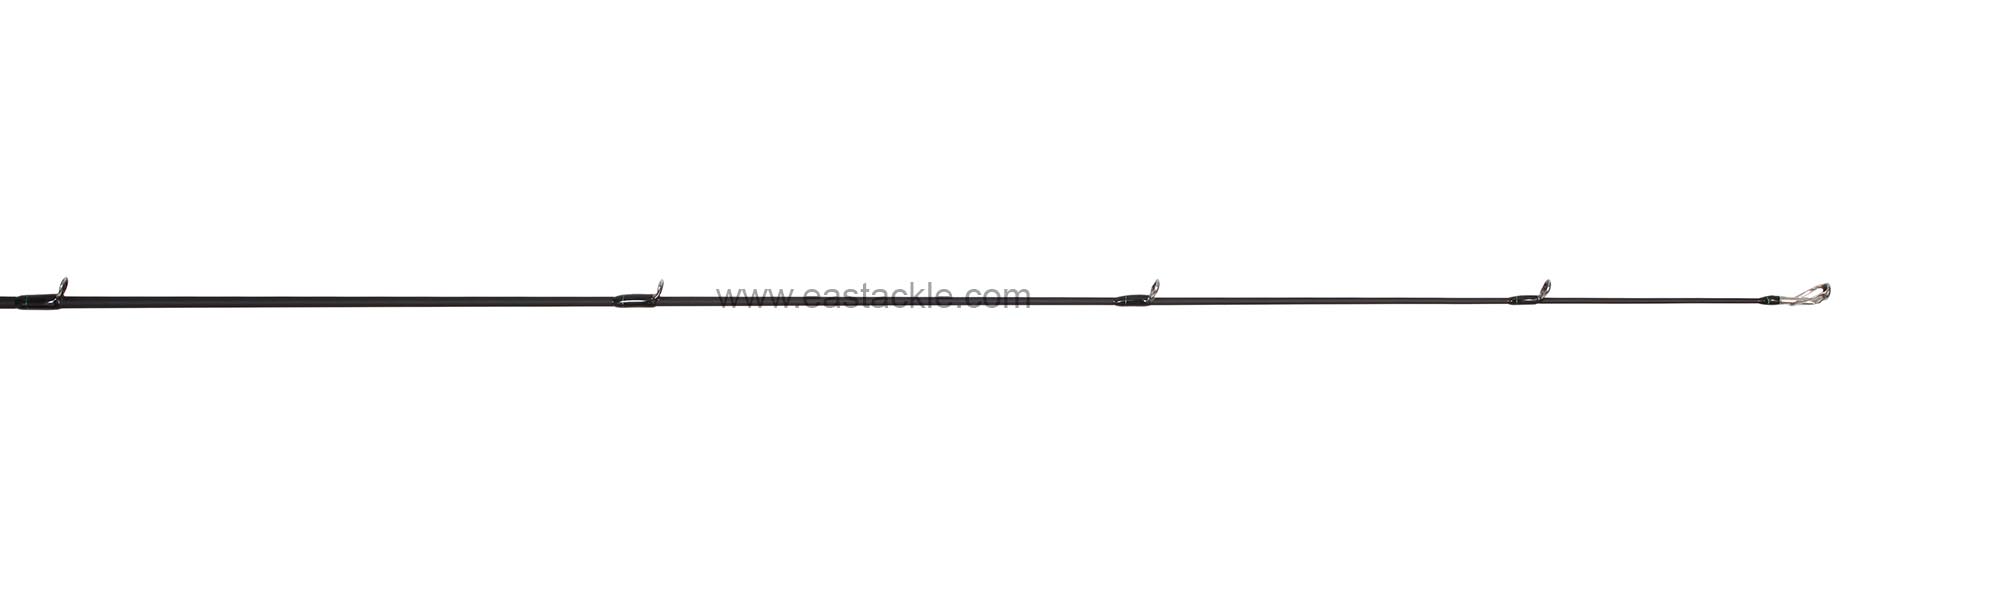 Rapala - Koivu - KVC651ML - Bait Casting Rod - Tip Section (Side View) | Eastackle